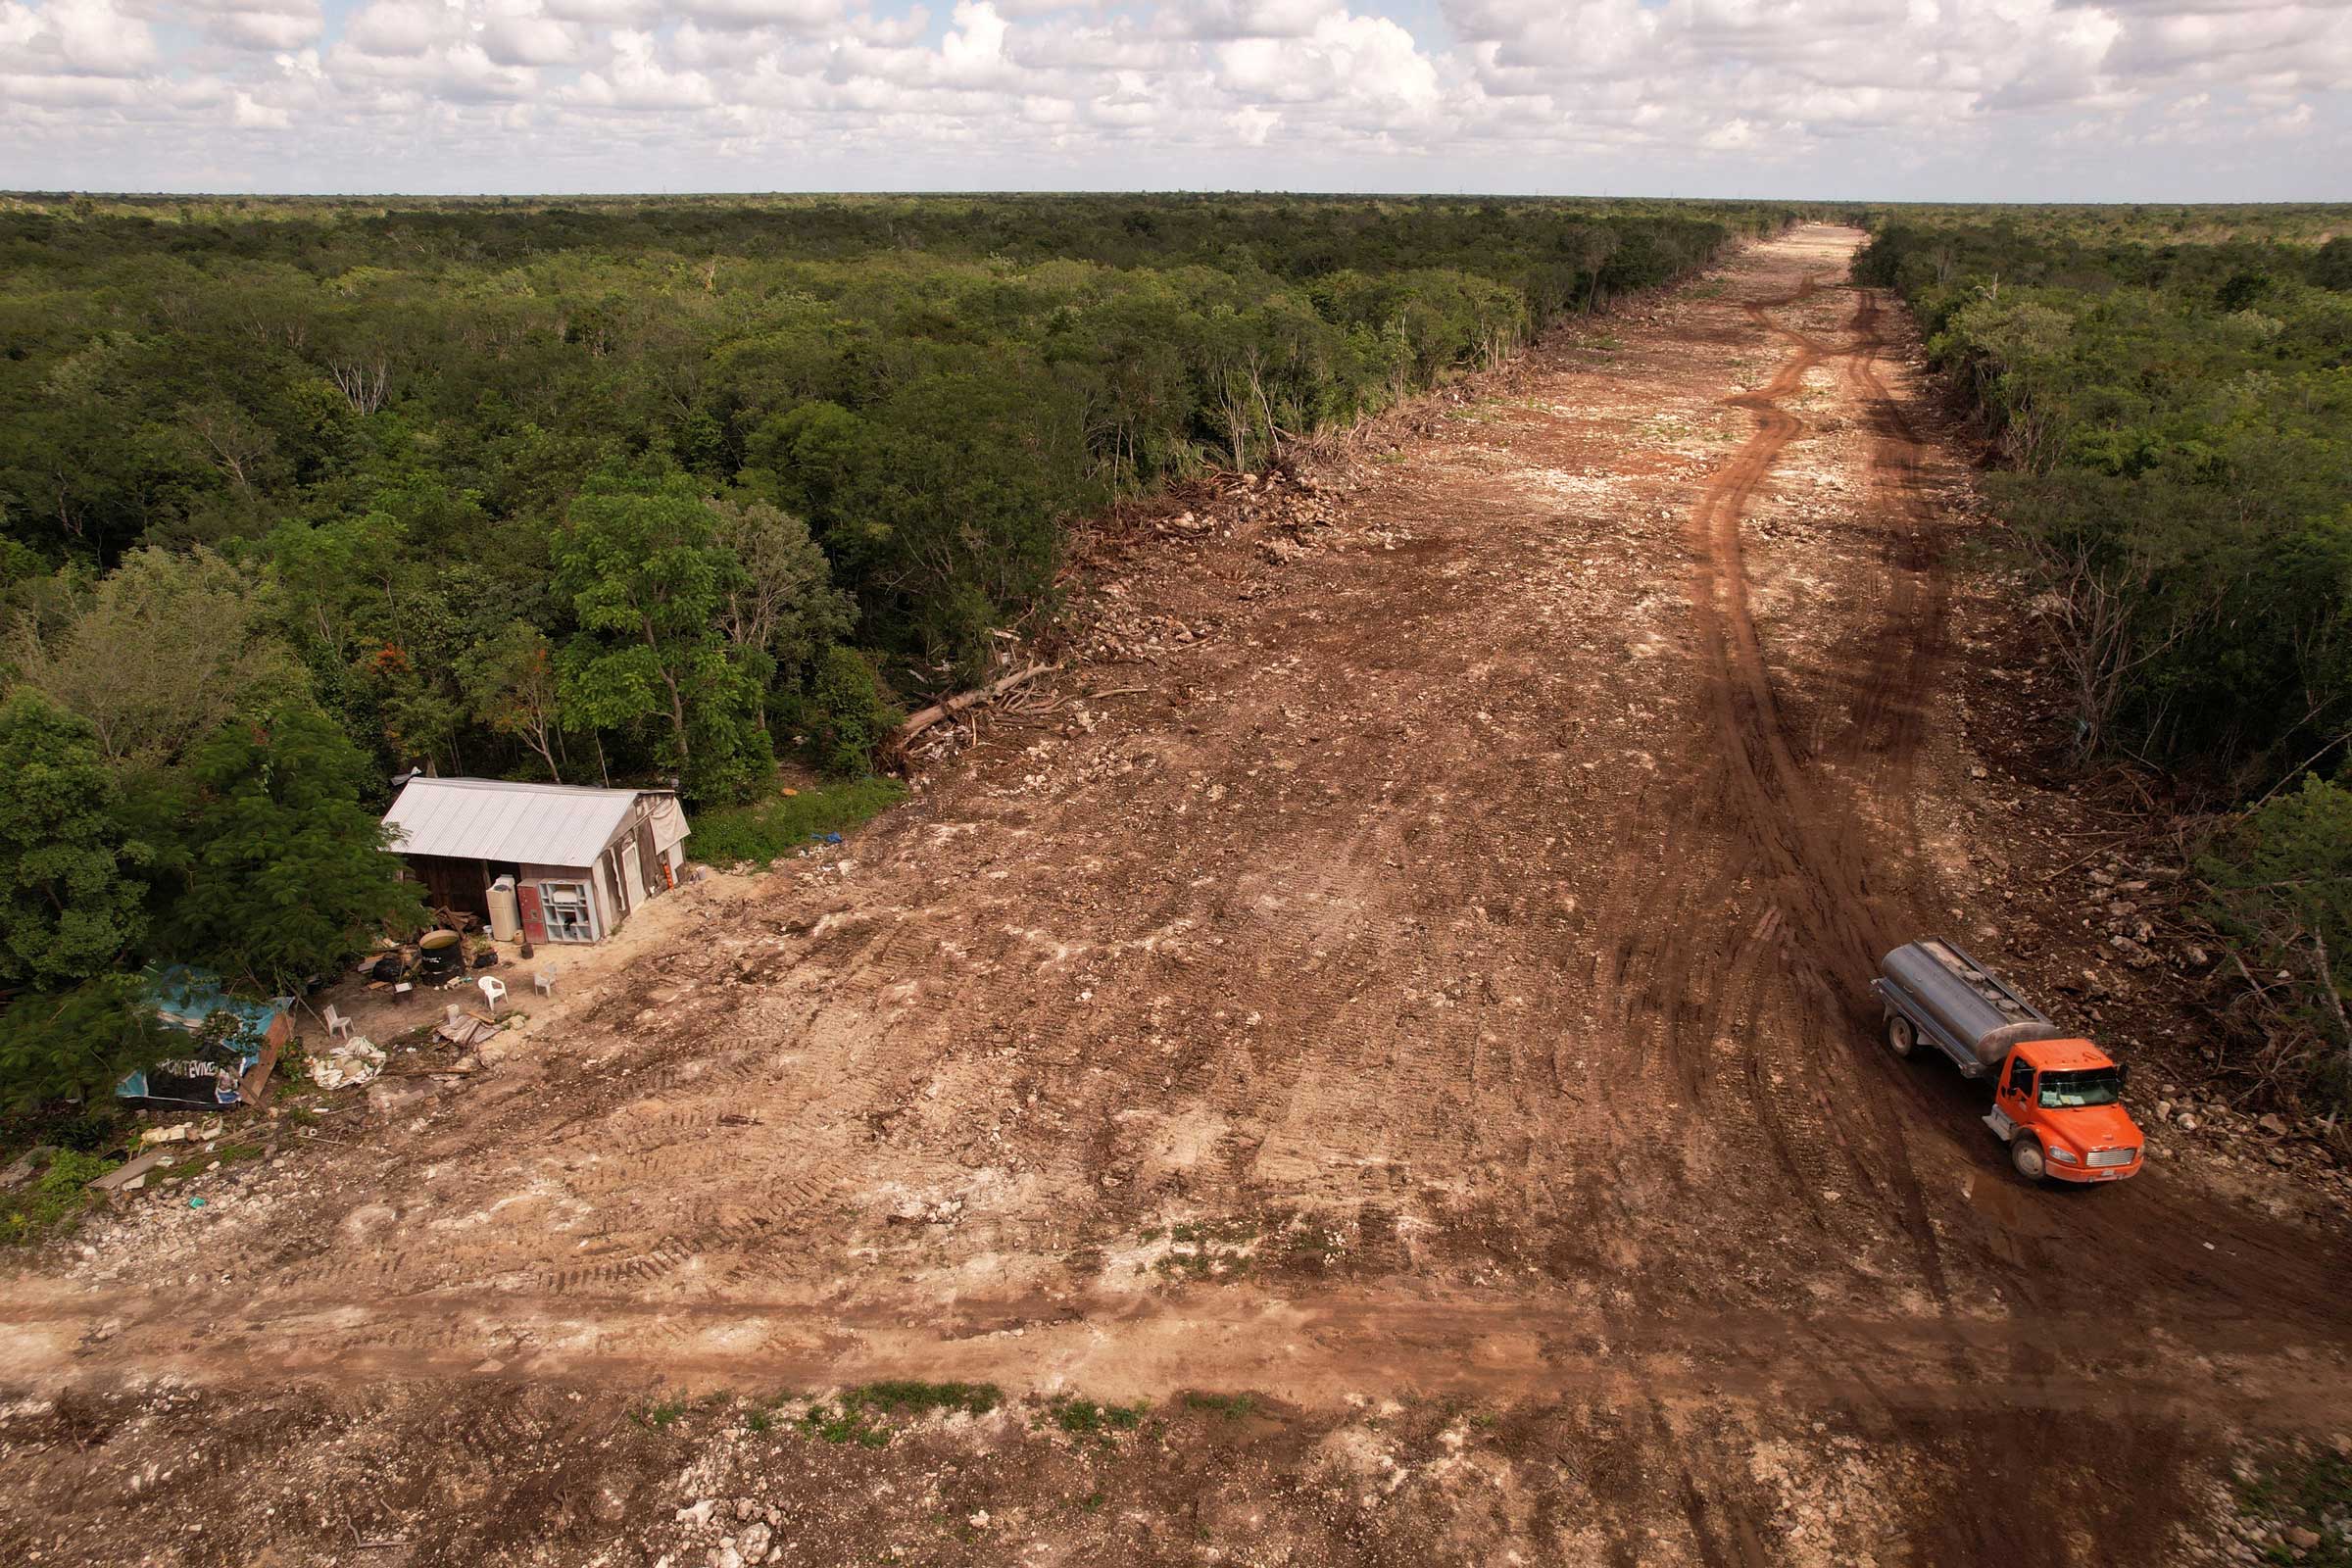 A house stands on the edge of forest which has been cleared for construction of section 5 of the new Mayan Train route, in Solidaridad, Quintana Roo, Mexico on Nov. 6, 2022. (Jose Luis Gonzalez—Reuters)